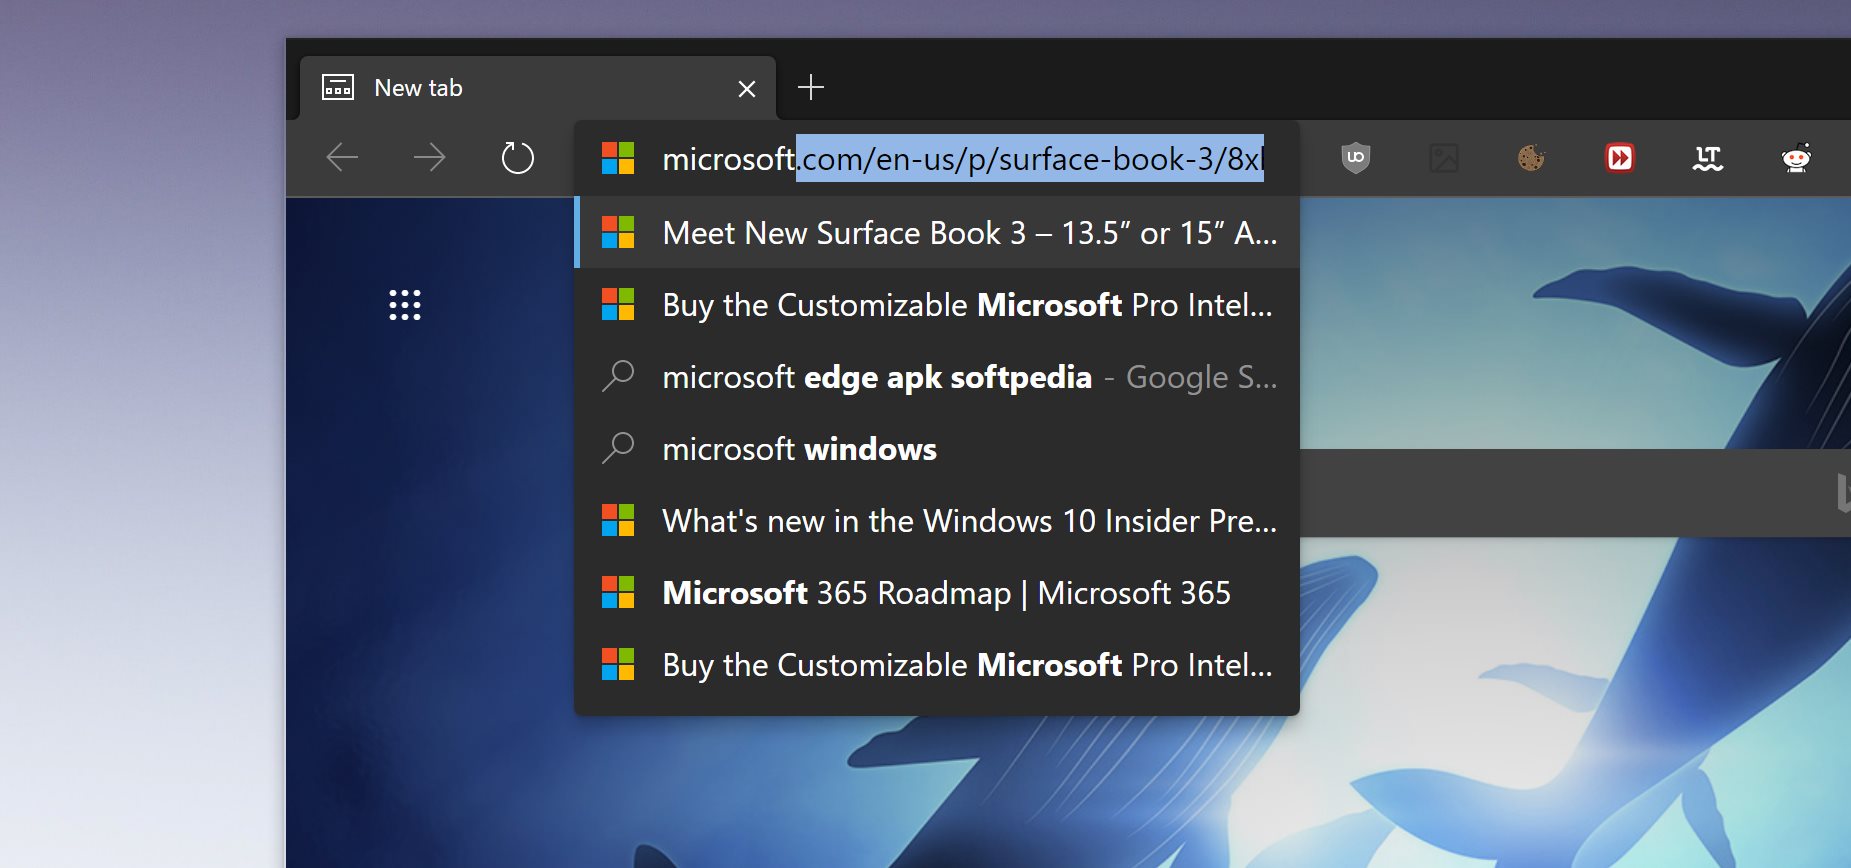 Microsoft Edge closes every time you type in the search bar, so you can fix it